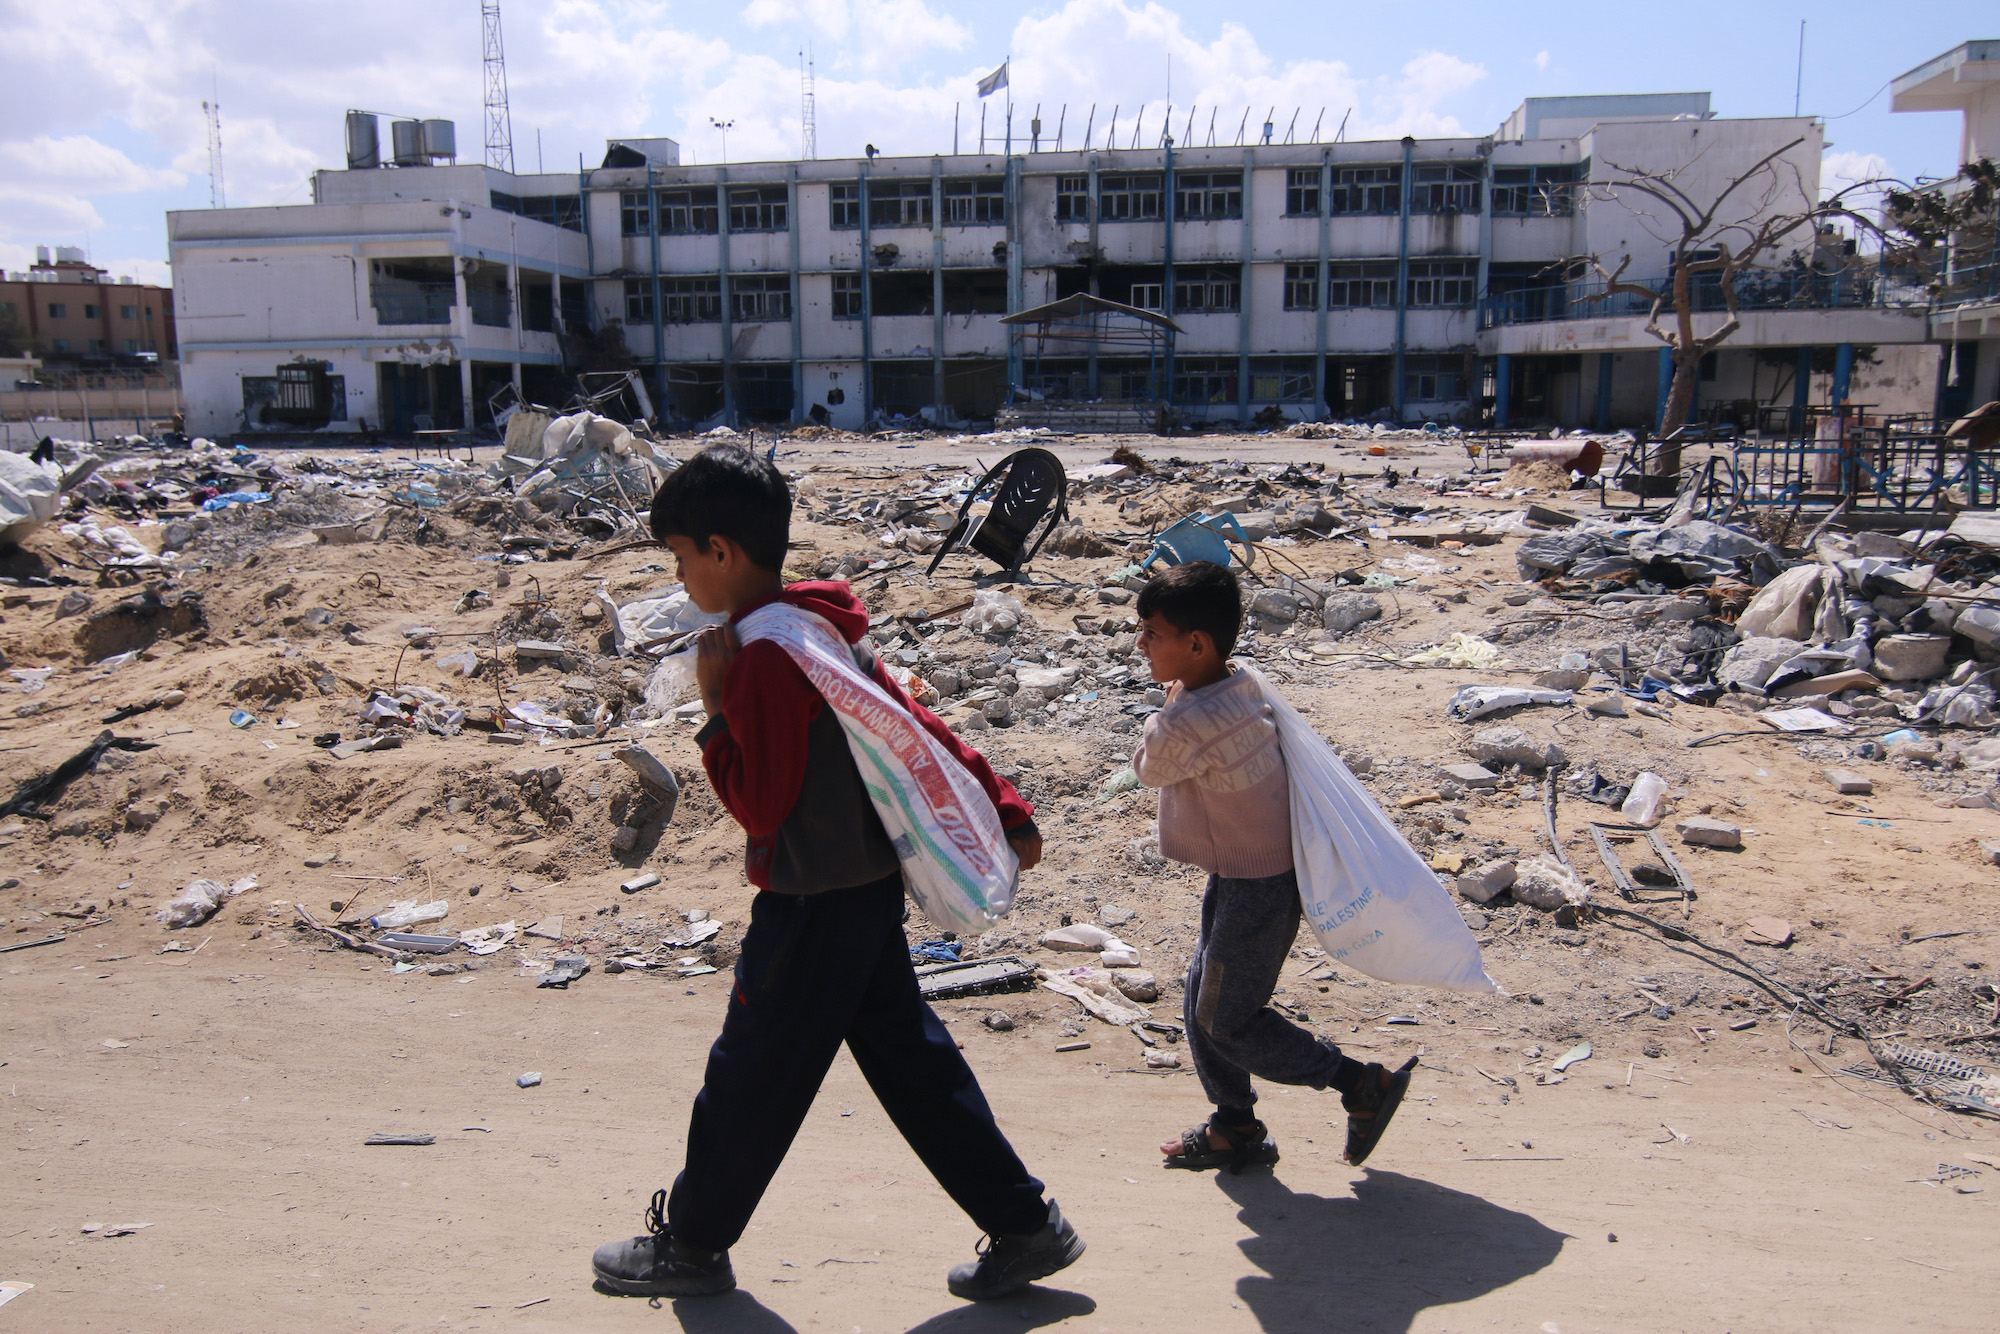 Palestinian children walk past rubble in Khan Younis, Gaza, on Friday.